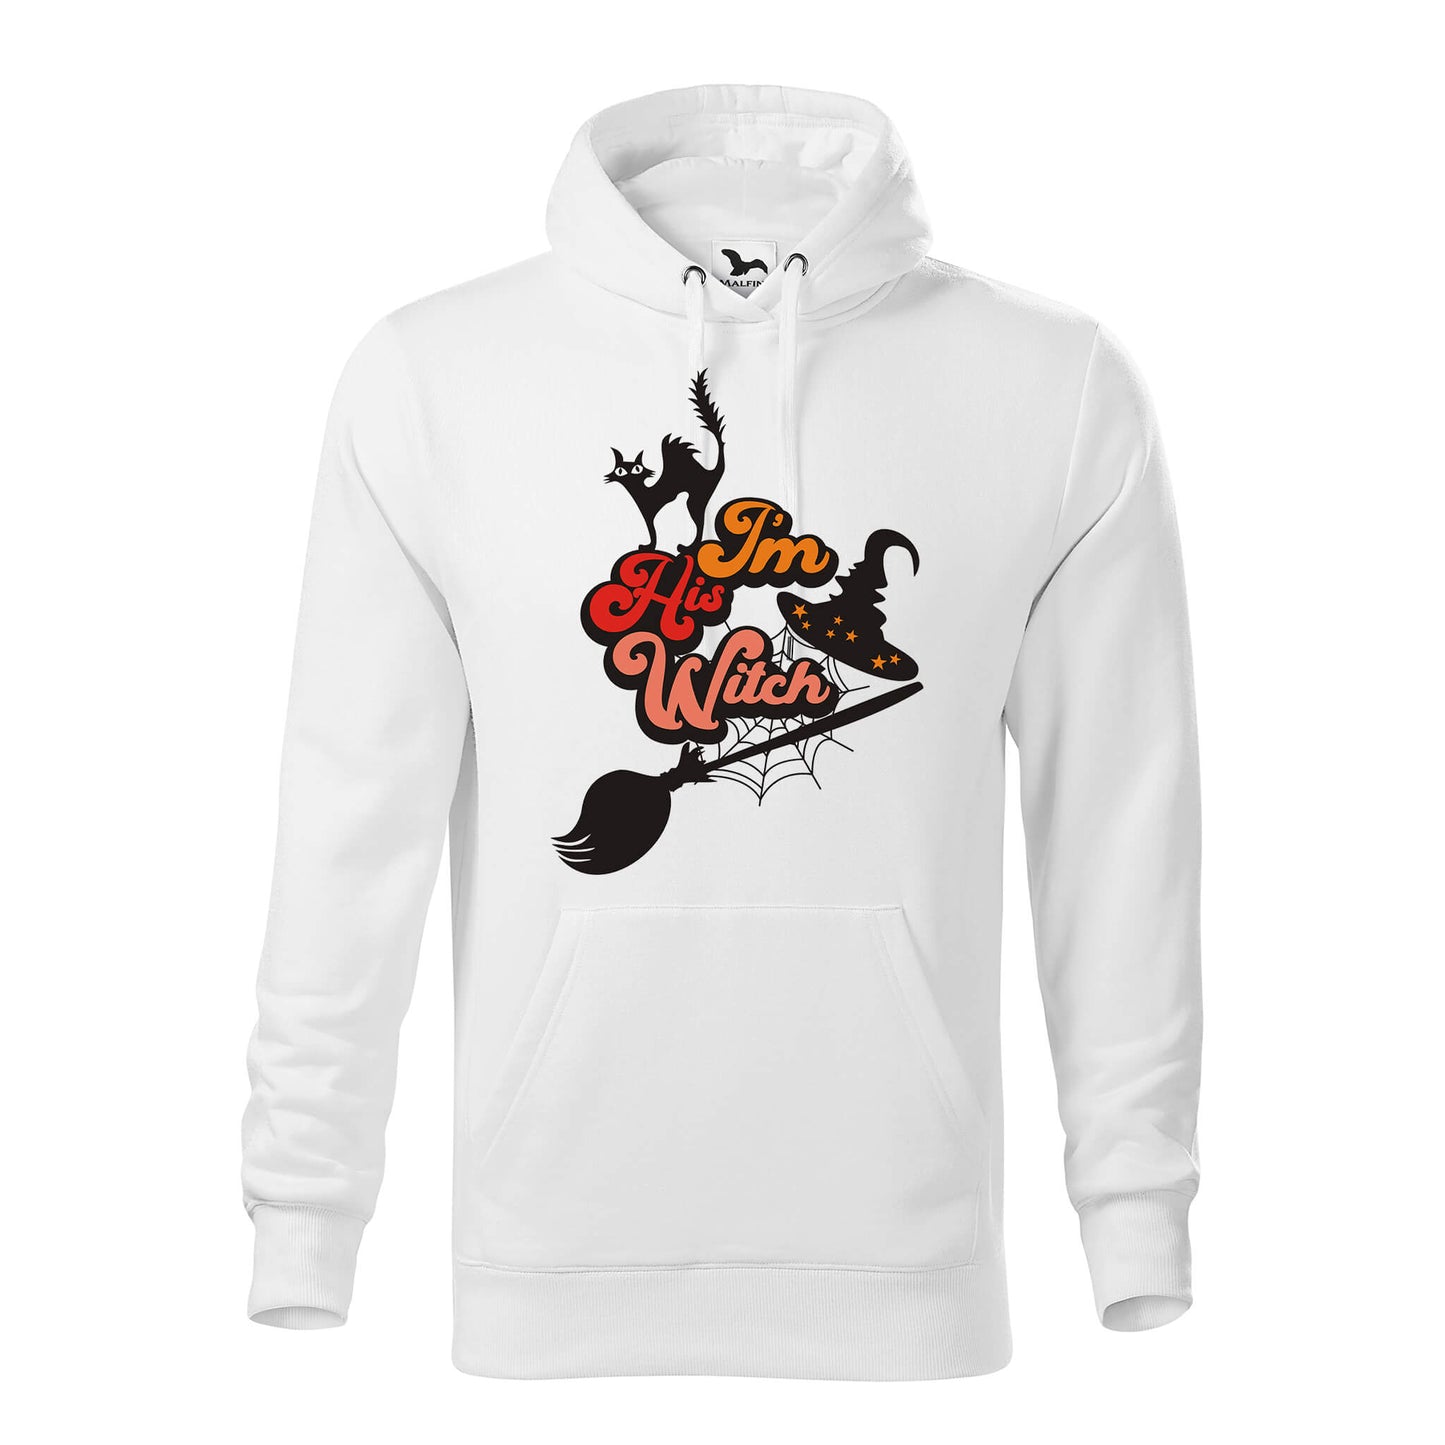 Im his witch 2 hoodie - rvdesignprint